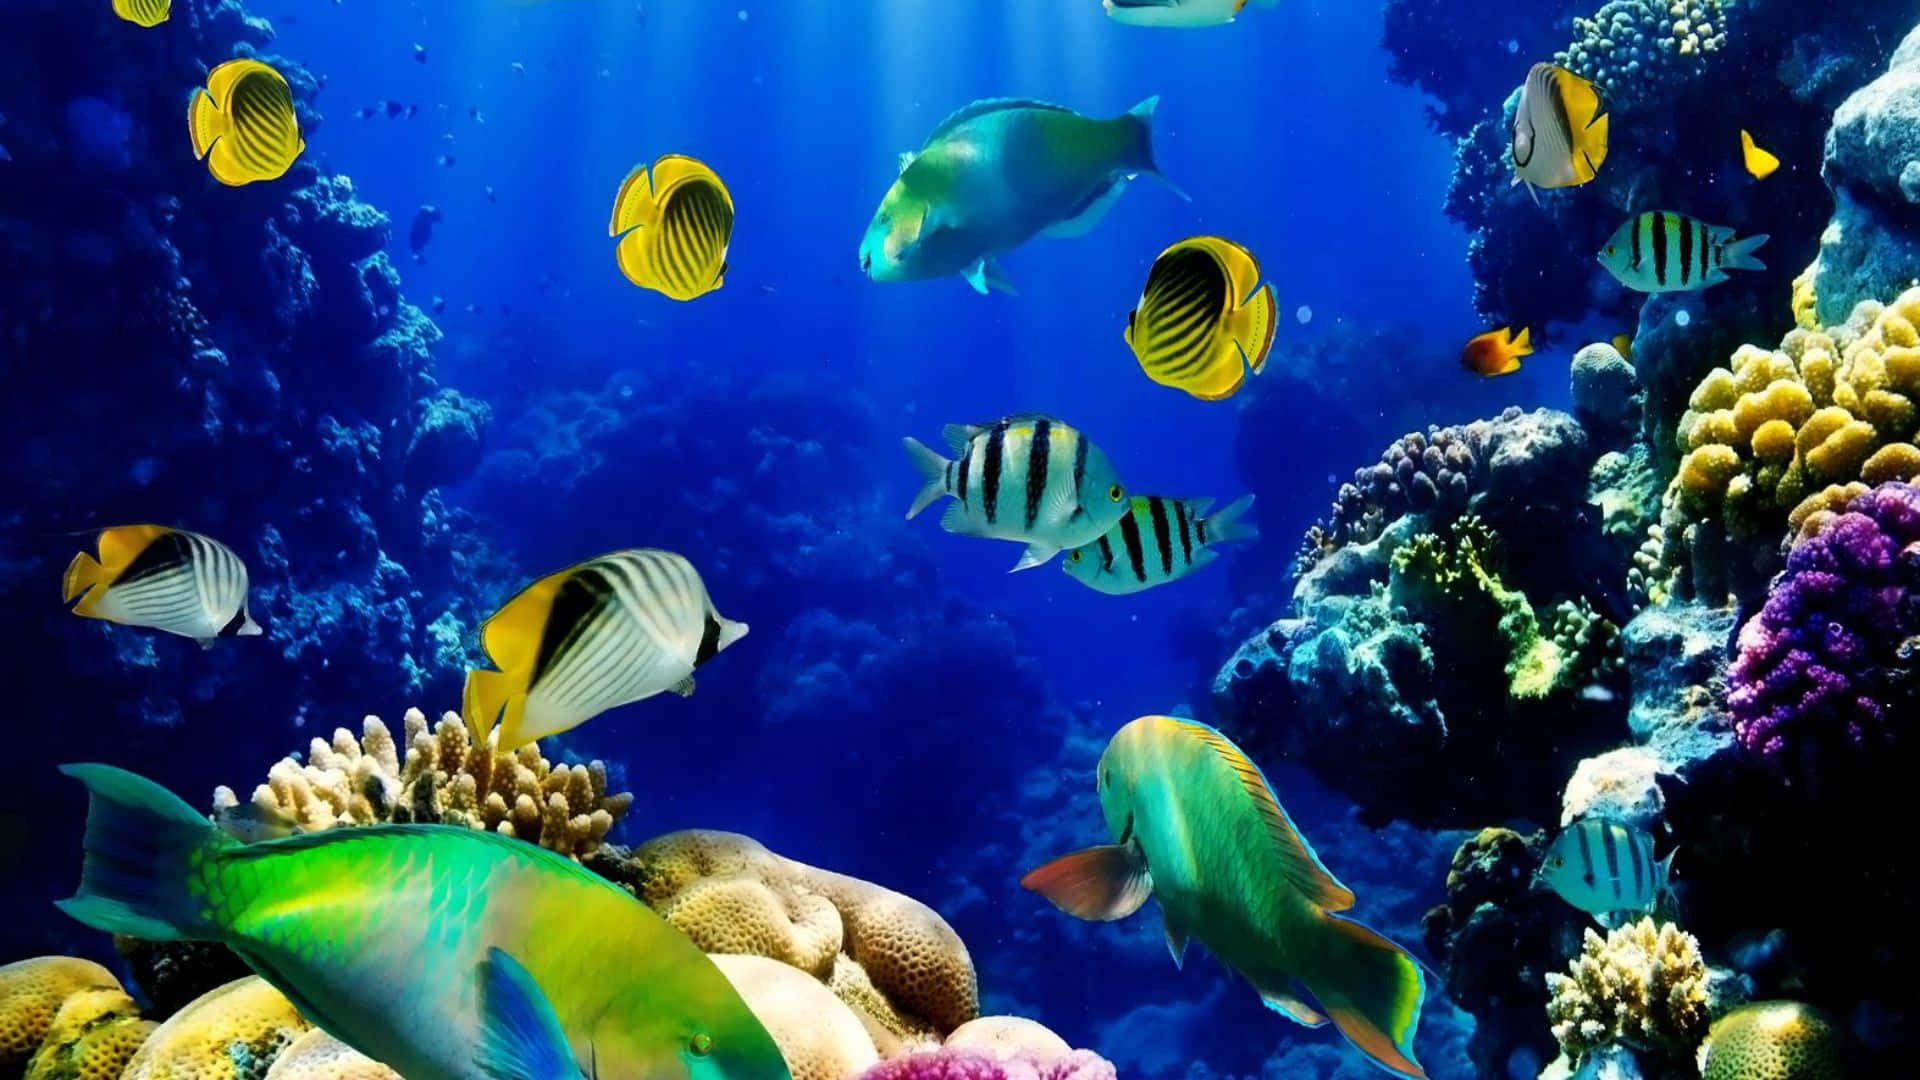 Download Lively 3D Fish Tank with Many Fish